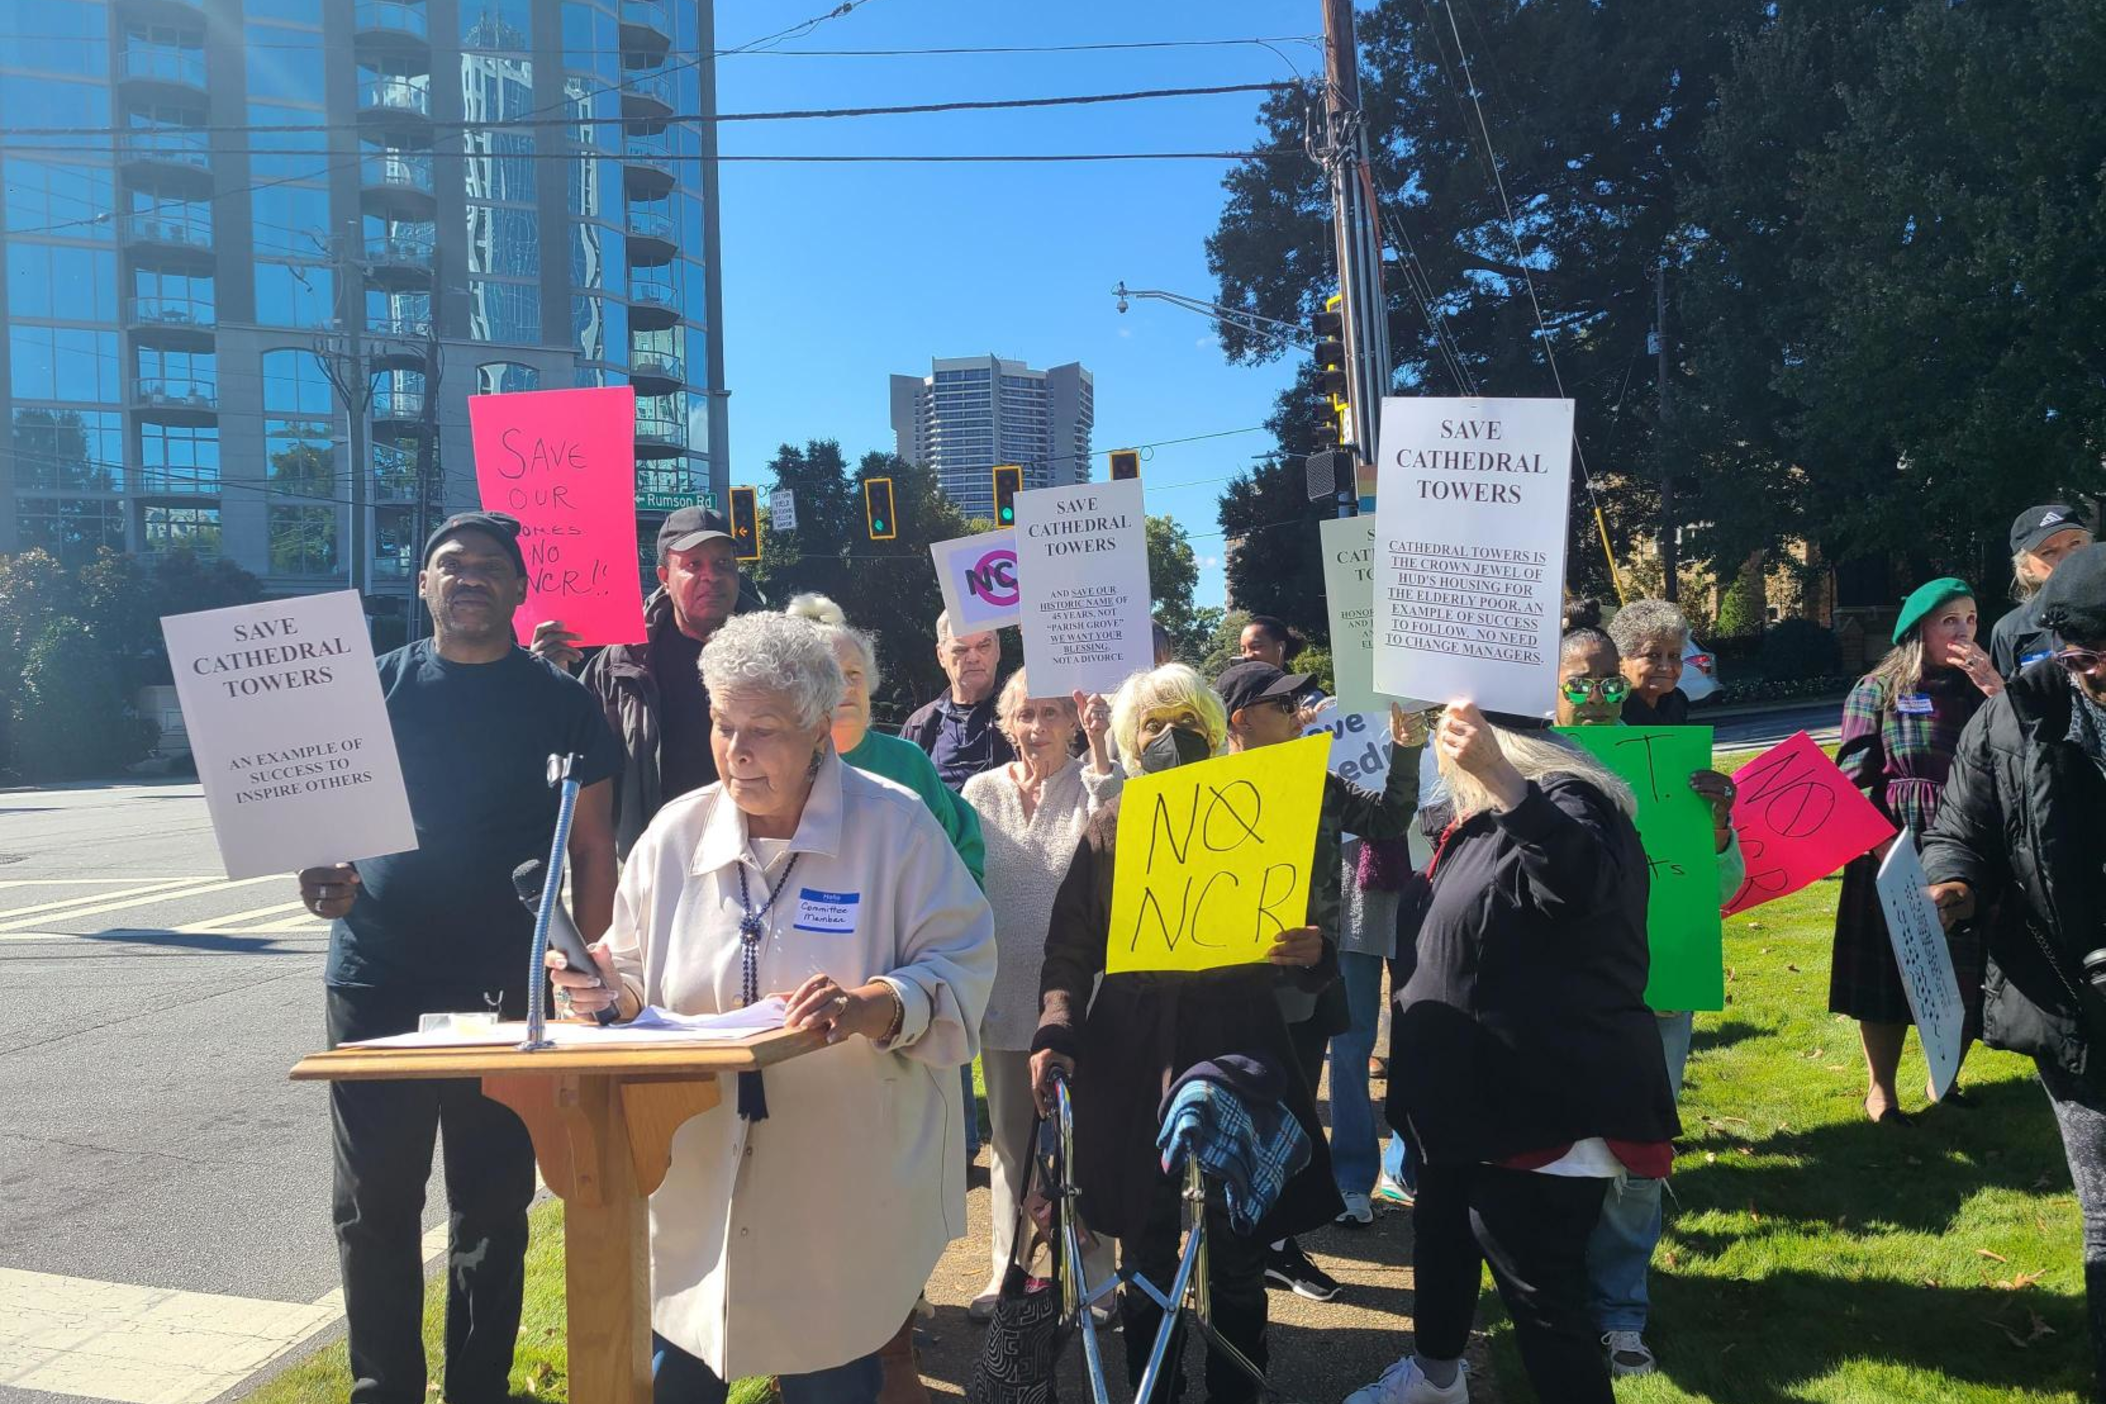 St.Phillips Cathedral Towers resident and vice chairman of its residents' association Denise Smith speaks at a rally outside the church protesting potential new property management.